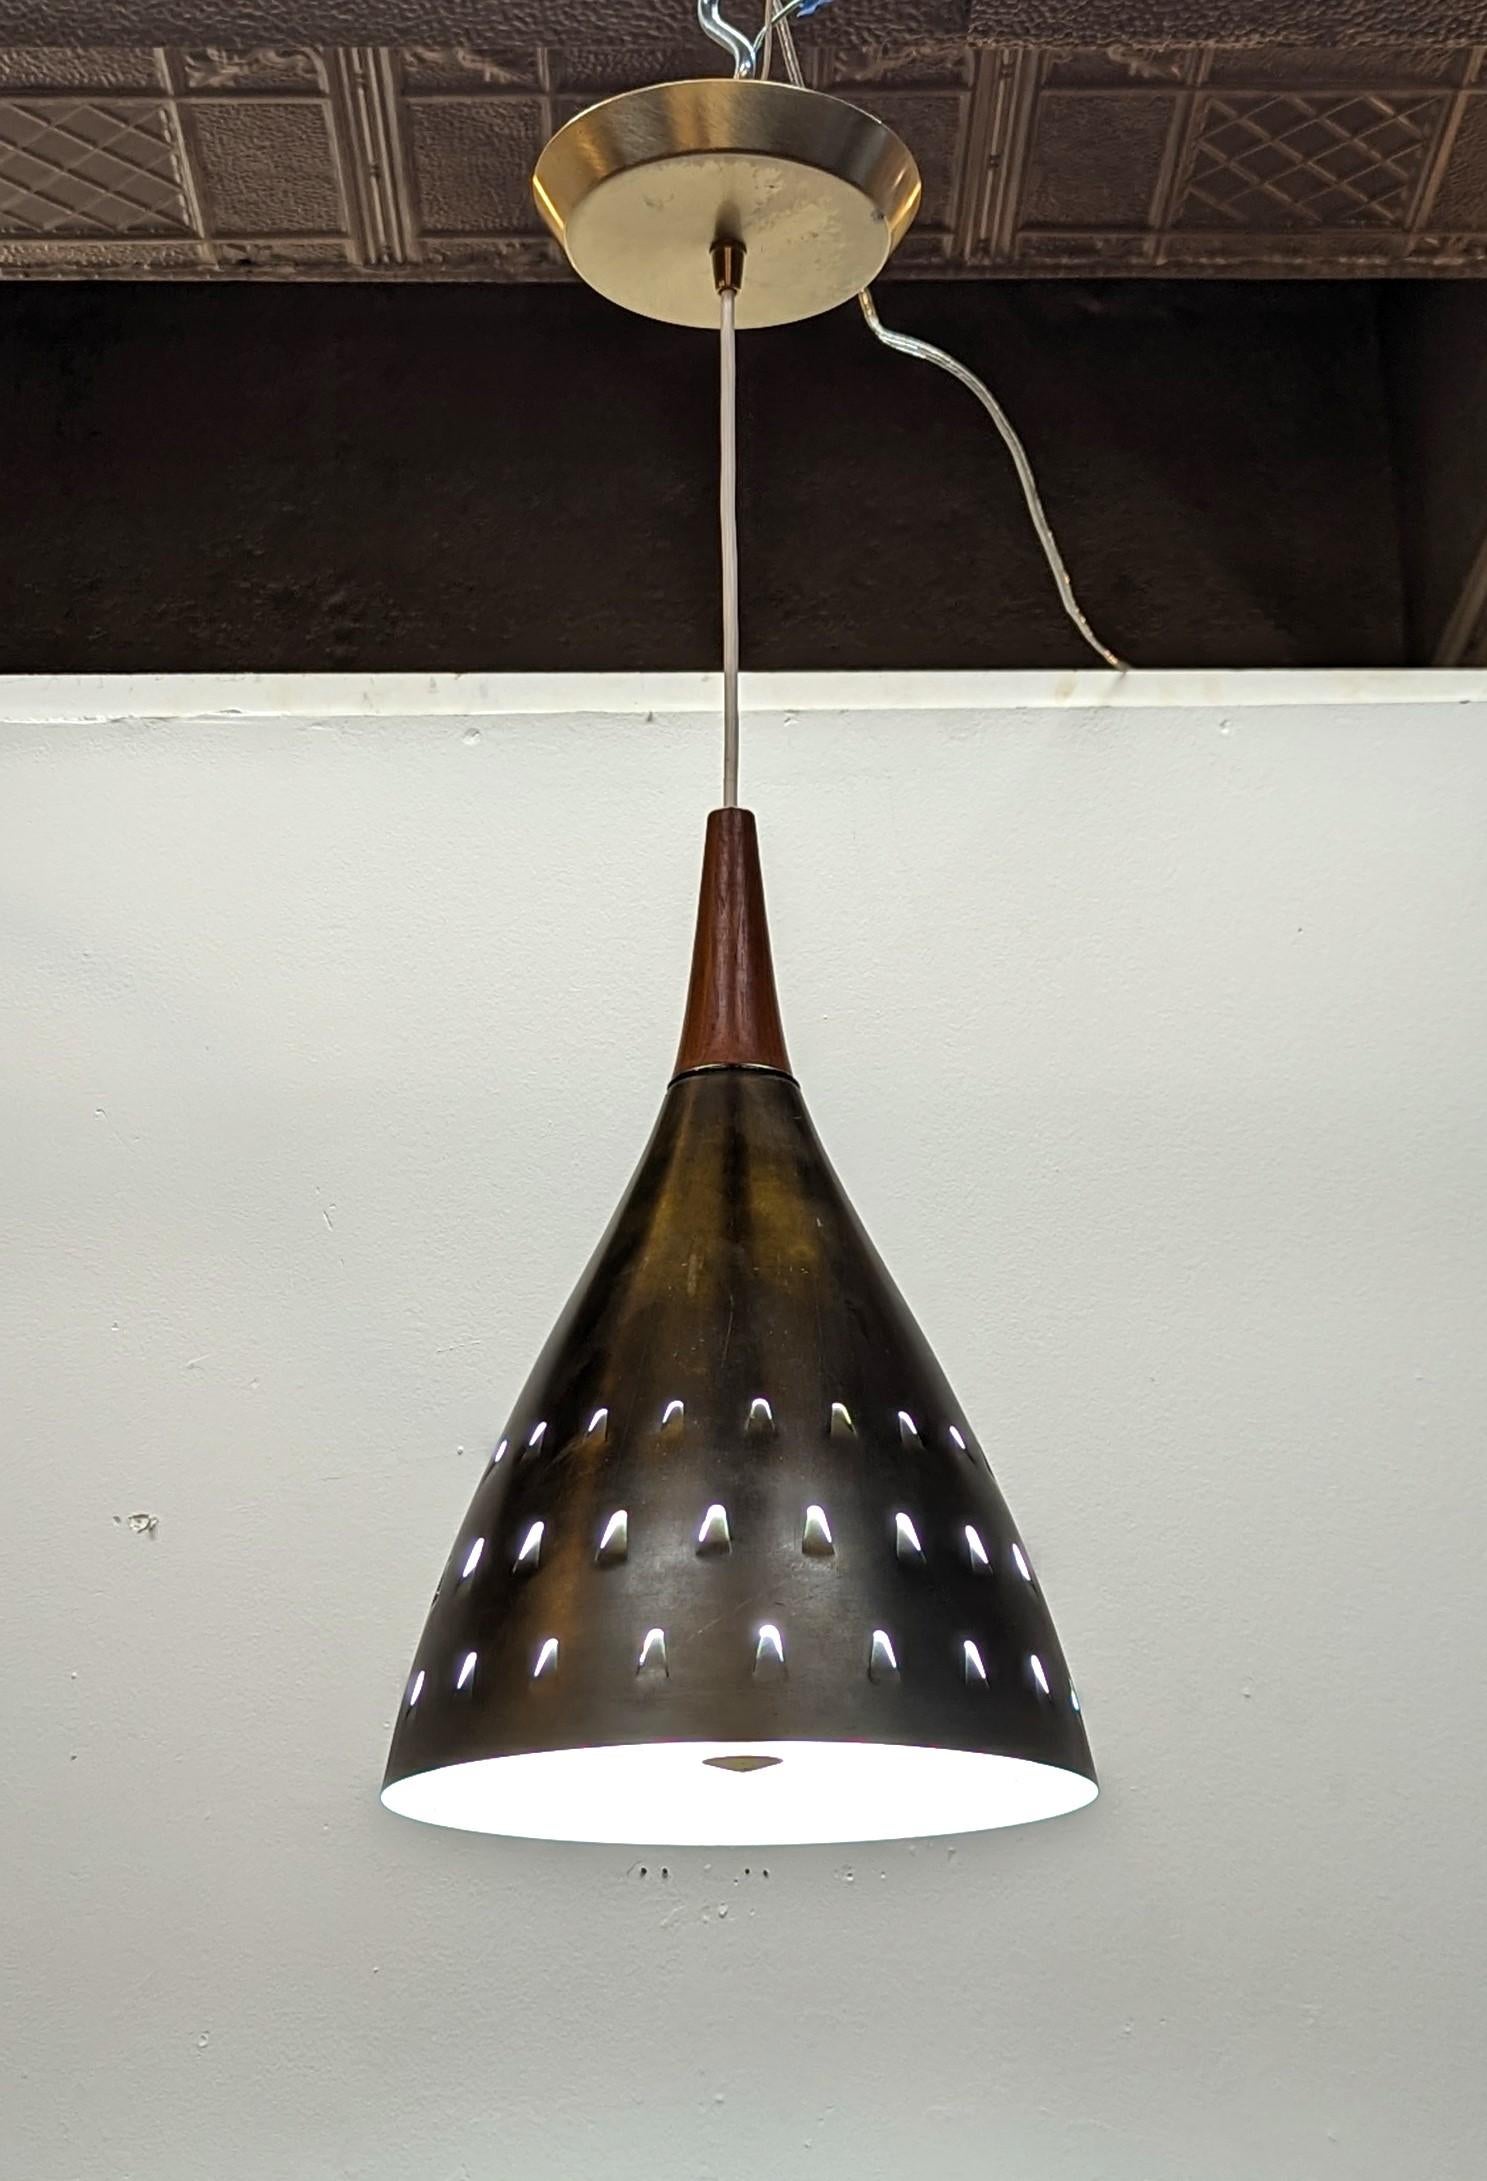 Mid Century Modern Brass & Teak Pendant Light in the style of Hans-Agne Jakobsson.  Solid brass perforated cone and brass canopy with teak finial.  Wonderful pendant light glows nicely through the U shaped perforations.  White glass diffuser allows